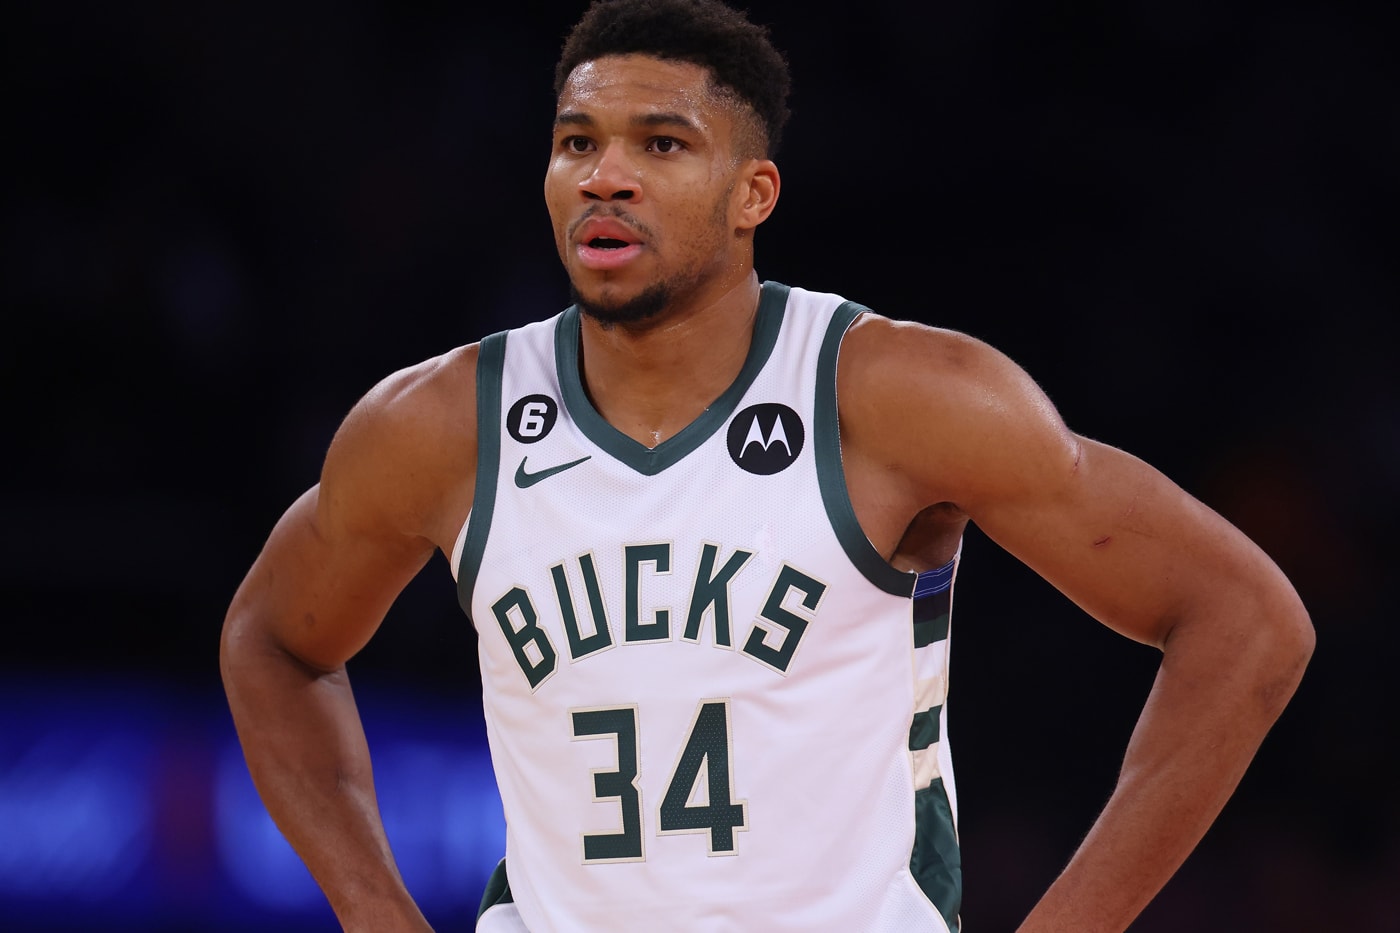 Giannis Antetokounmpo bucks stay fr34ky Fr34k show unseen ft34ky hours three trademarks greek freak wet suit face mask lanyard wristband sports water bottles stress relief balls backpack 